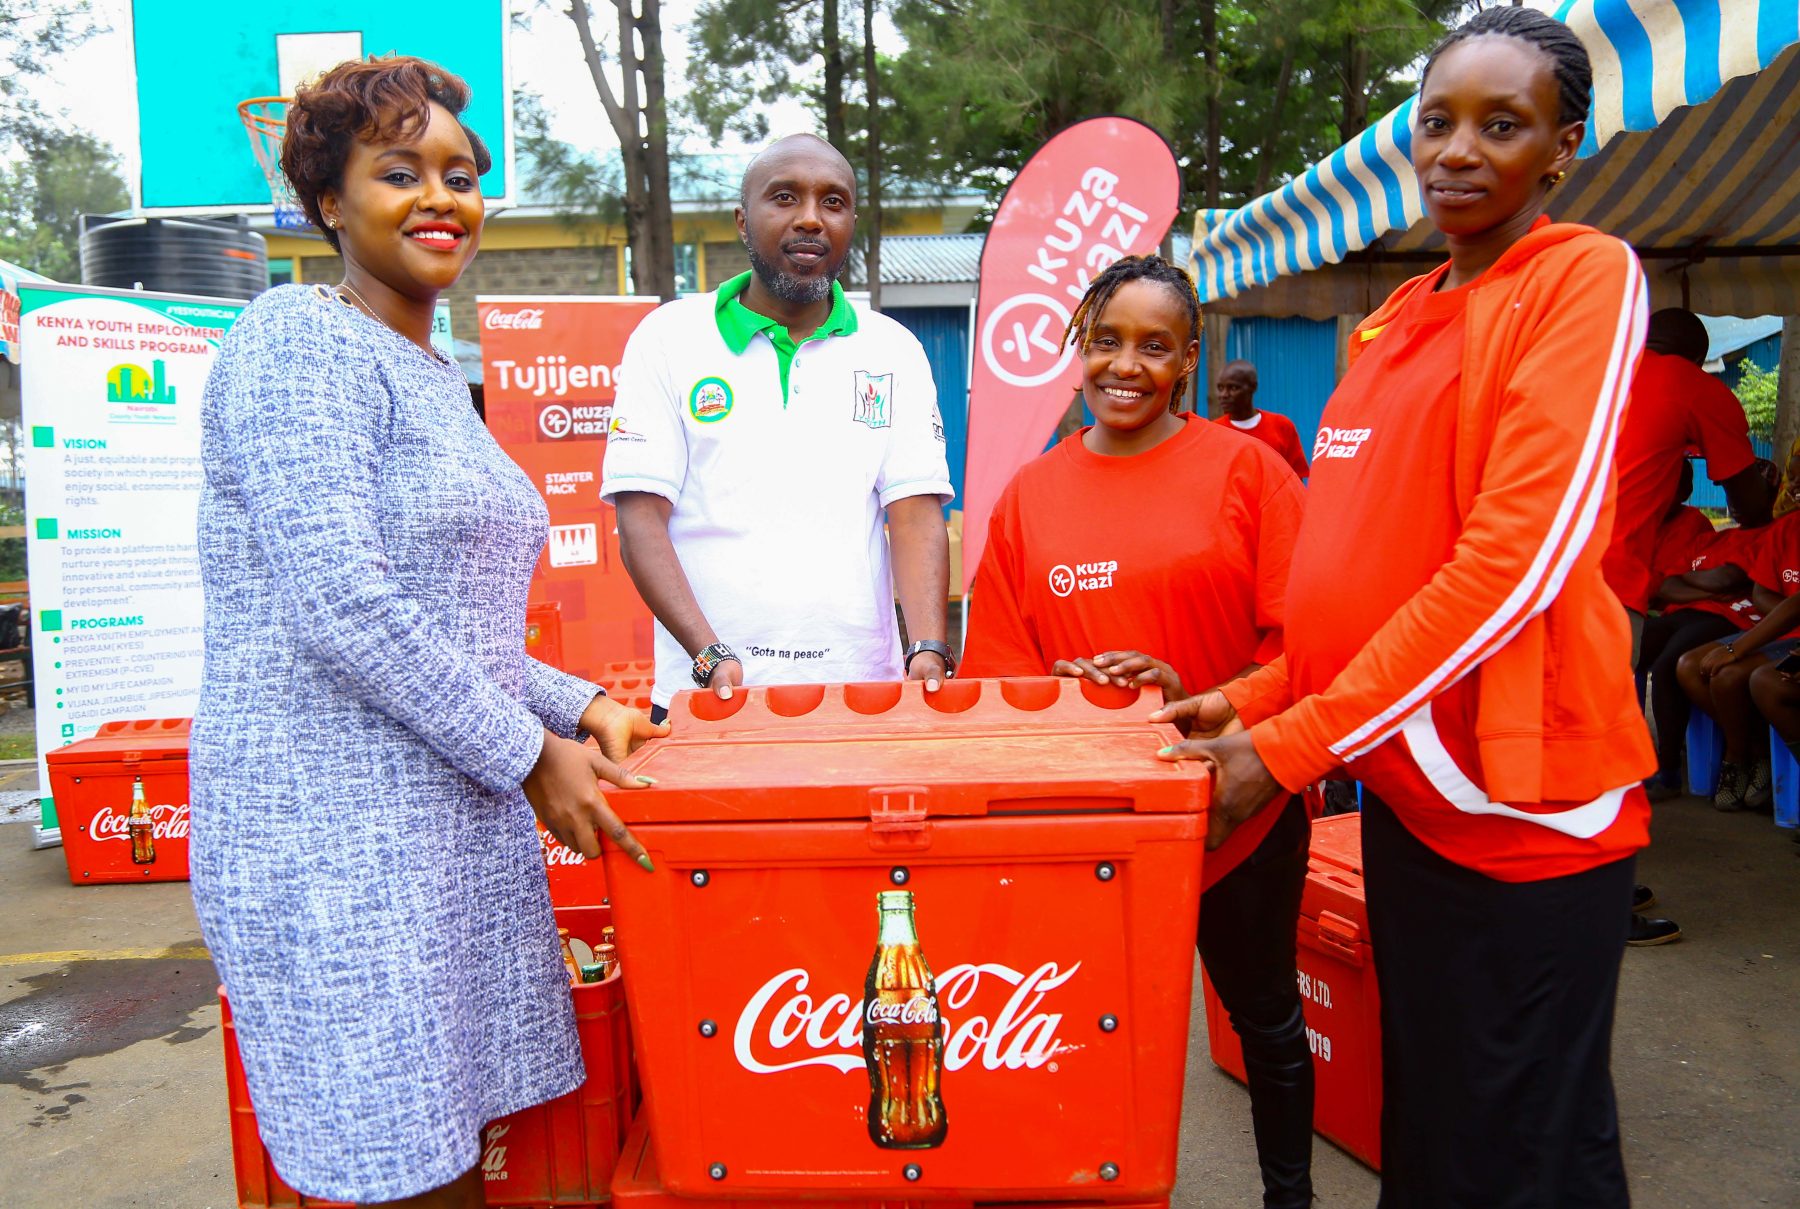 Coca-Cola Sustainability Coordinator Public Affairs and Communications, Victoria Macharia (Left), in company of One-Stop Youth Program Coordinator, Wainaina Muiruri (second left), present a Coca-Cola sales starter pack inclusive of a cooler box and crates of Coca-Cola beverages to Kuza Kazi beneficiaries, Wincete Karemi (Right) and Doreen Omwenga.